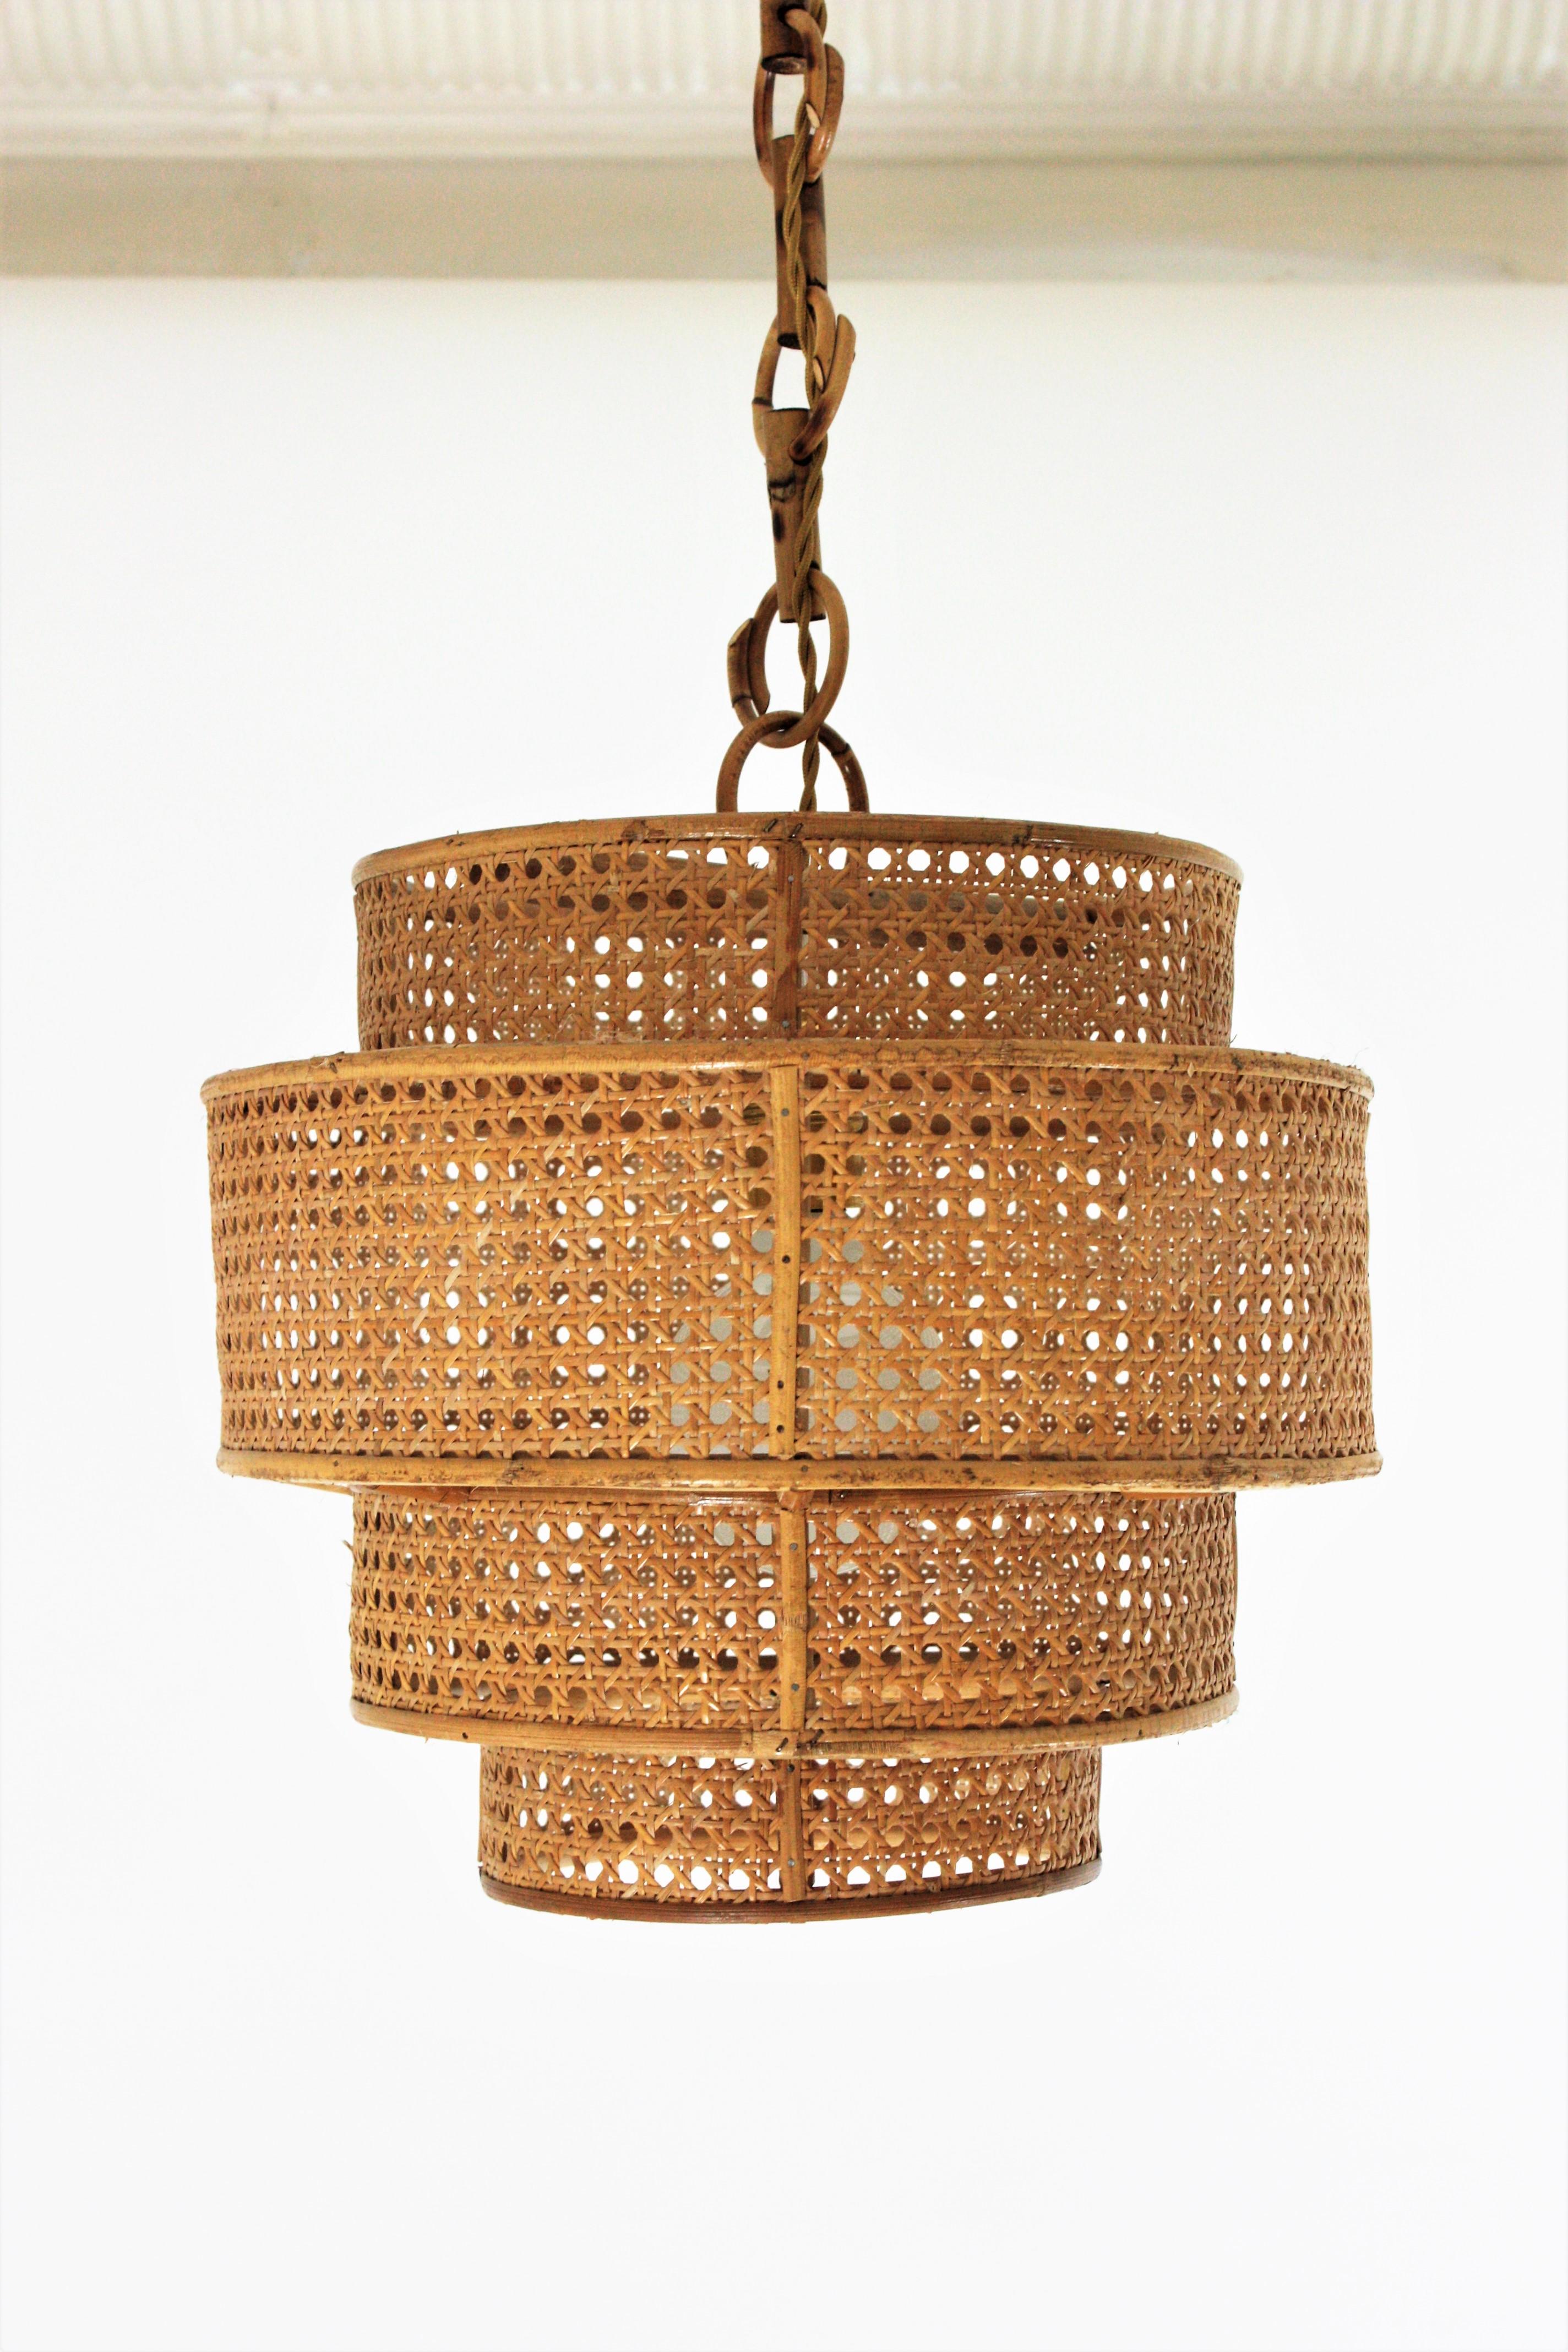 Mid-Century Modern  Rattan Wicker Weave Concentric Cylinder Pendant Hanging Light  For Sale